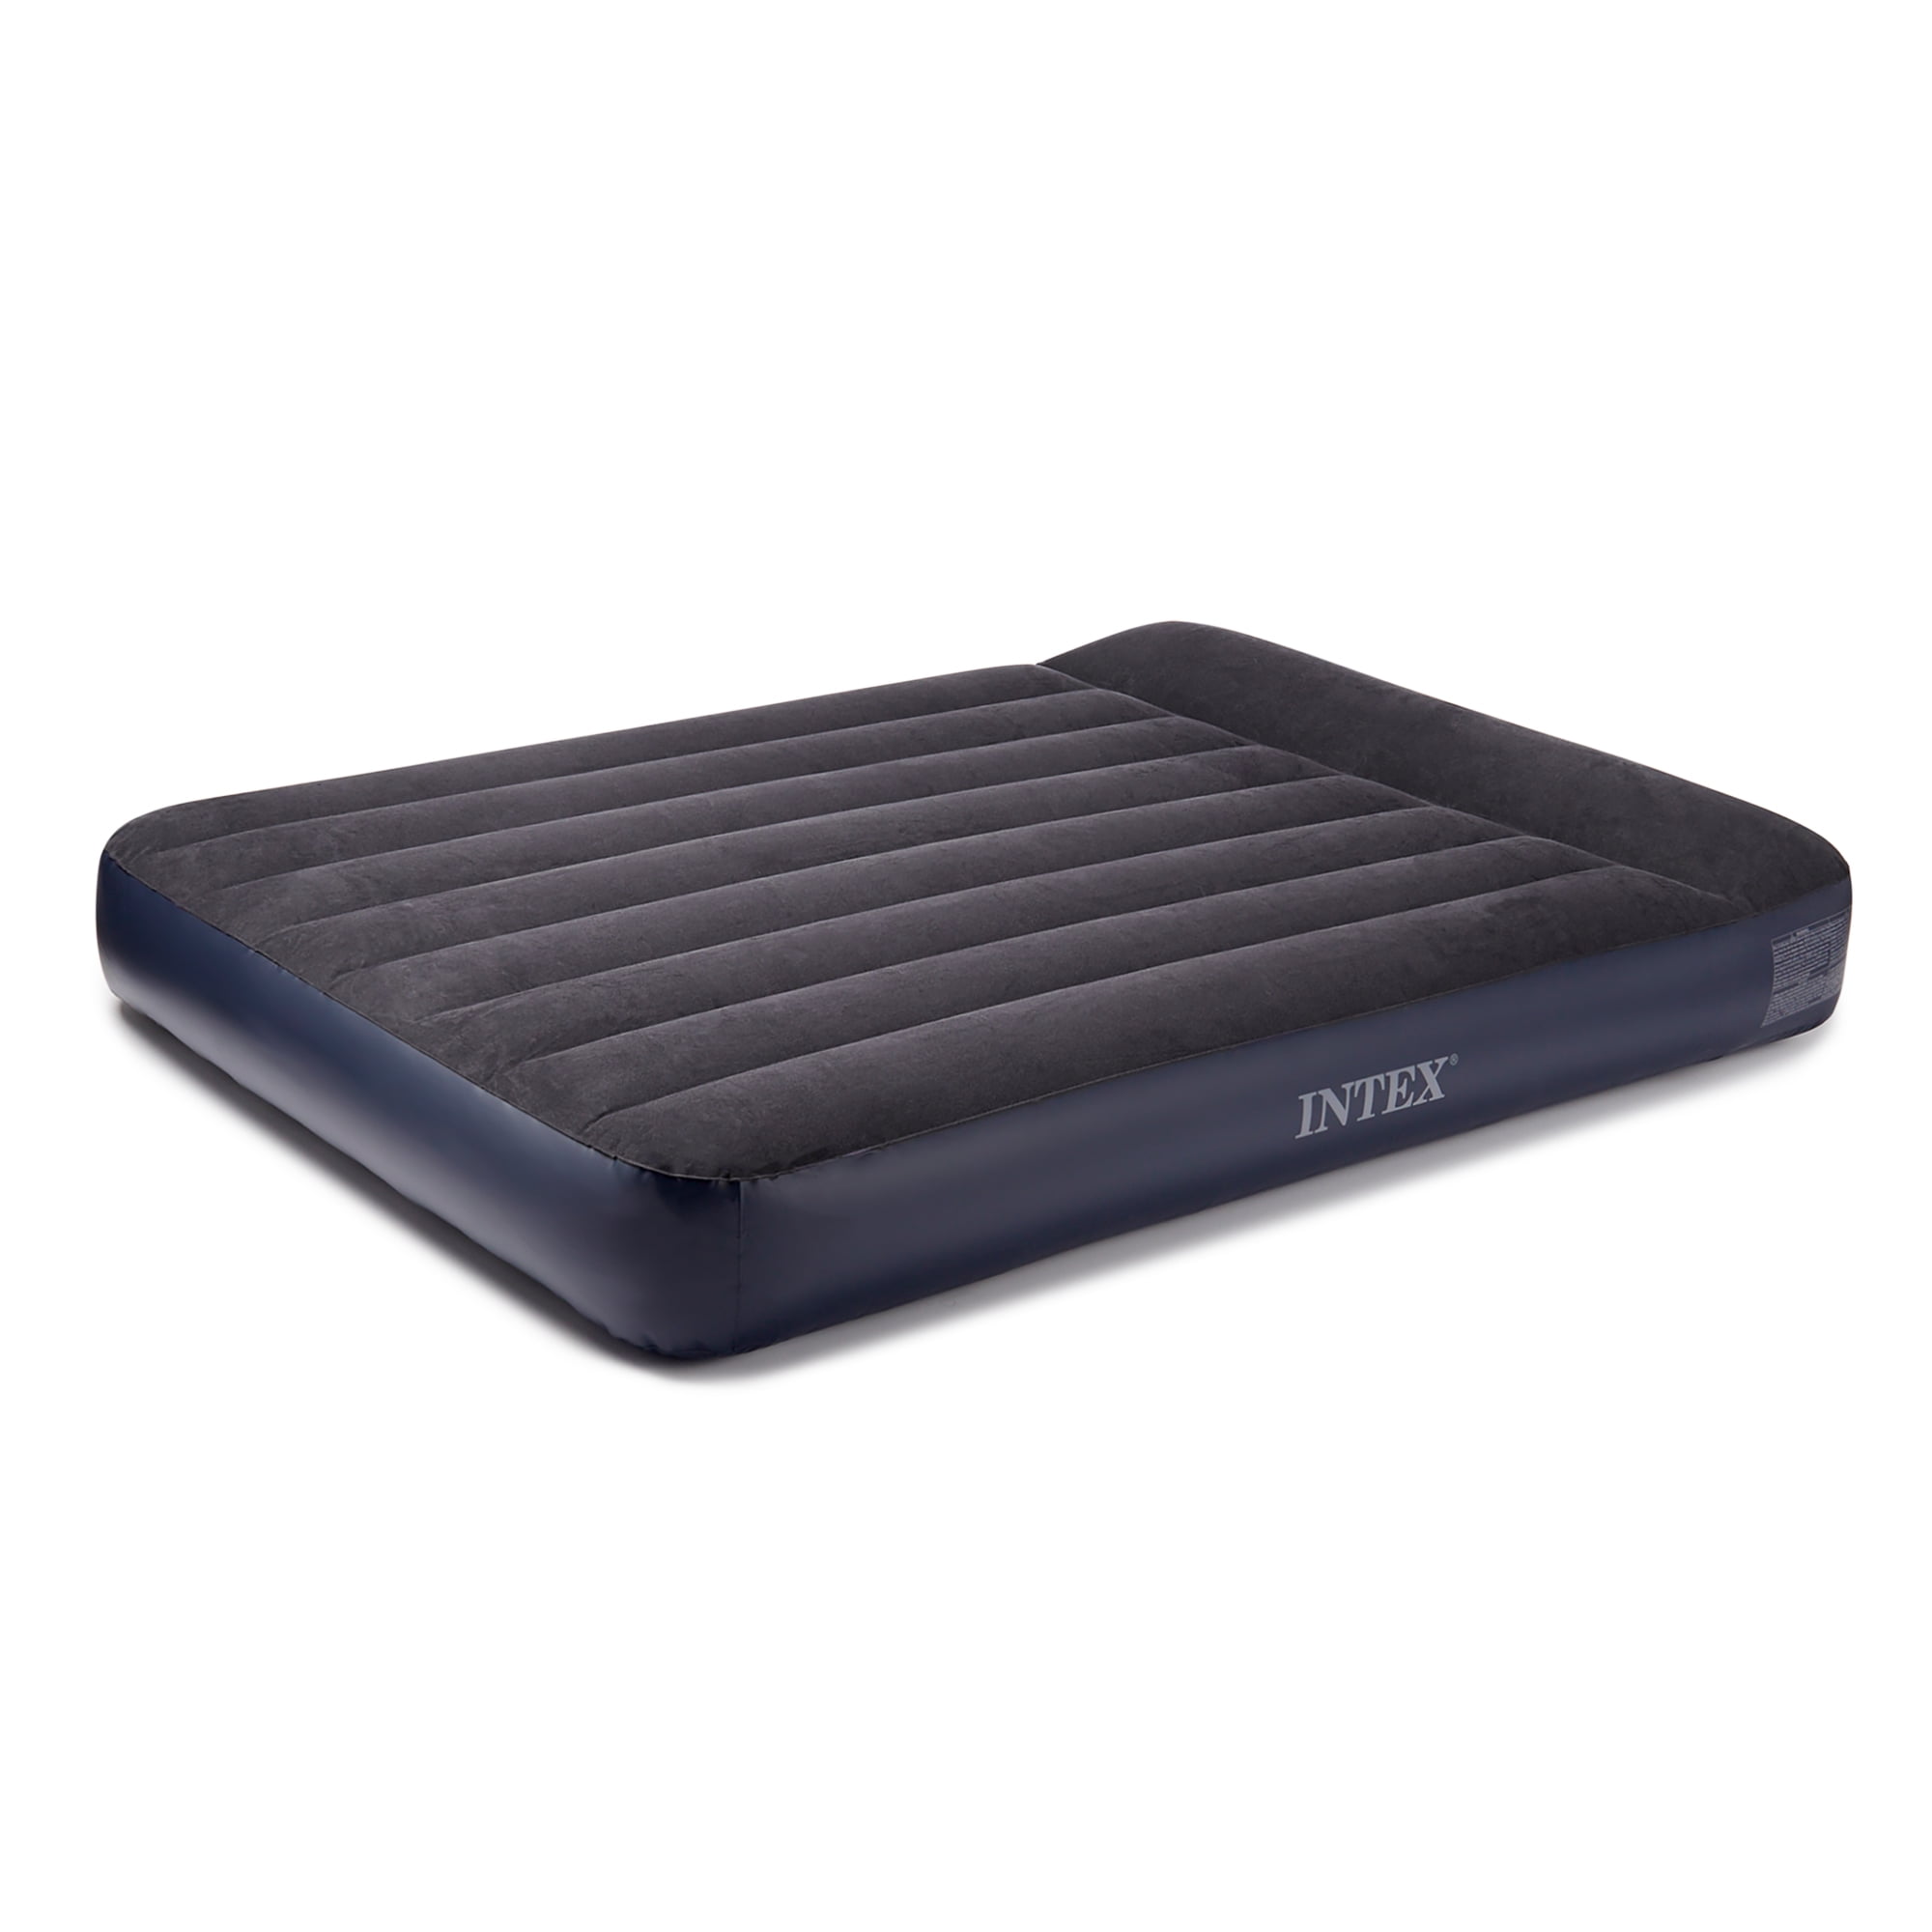 Intex Dura Beam Standard Pillow Rest Classic Airbed with Built-In Pump Queen 